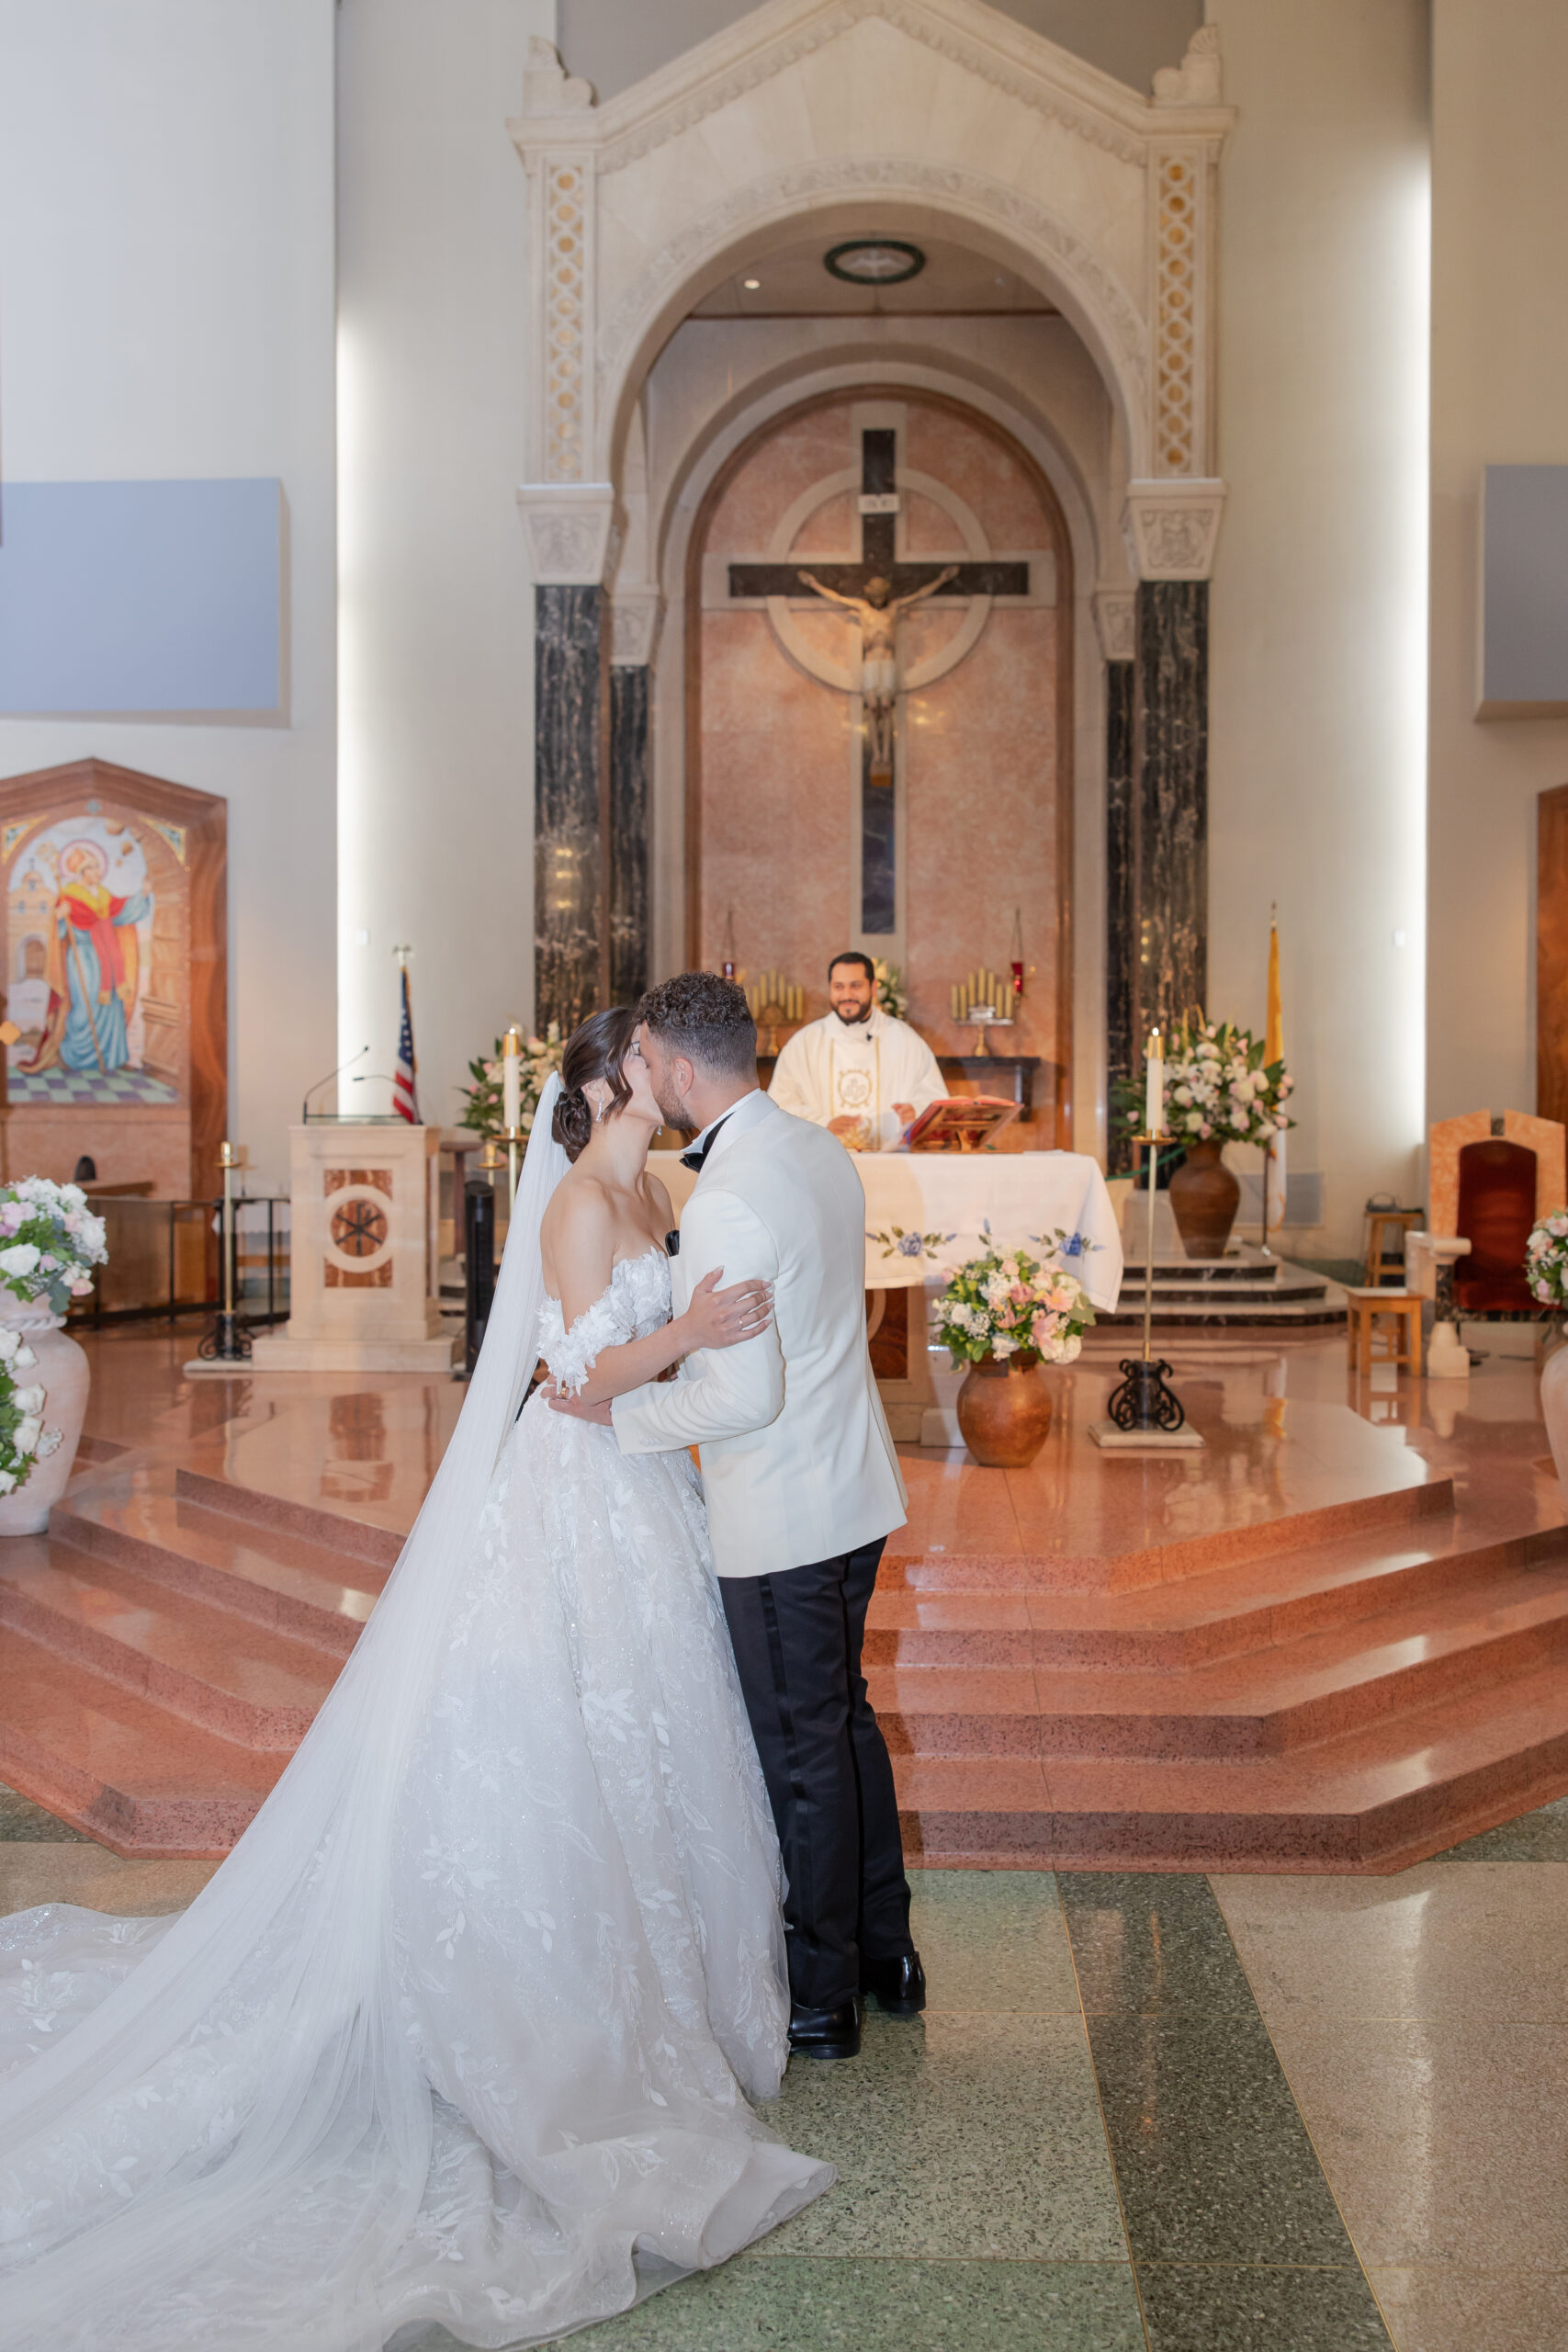 Bride and groom kissing at the altar at Saint Emydius church in Los Angeles.